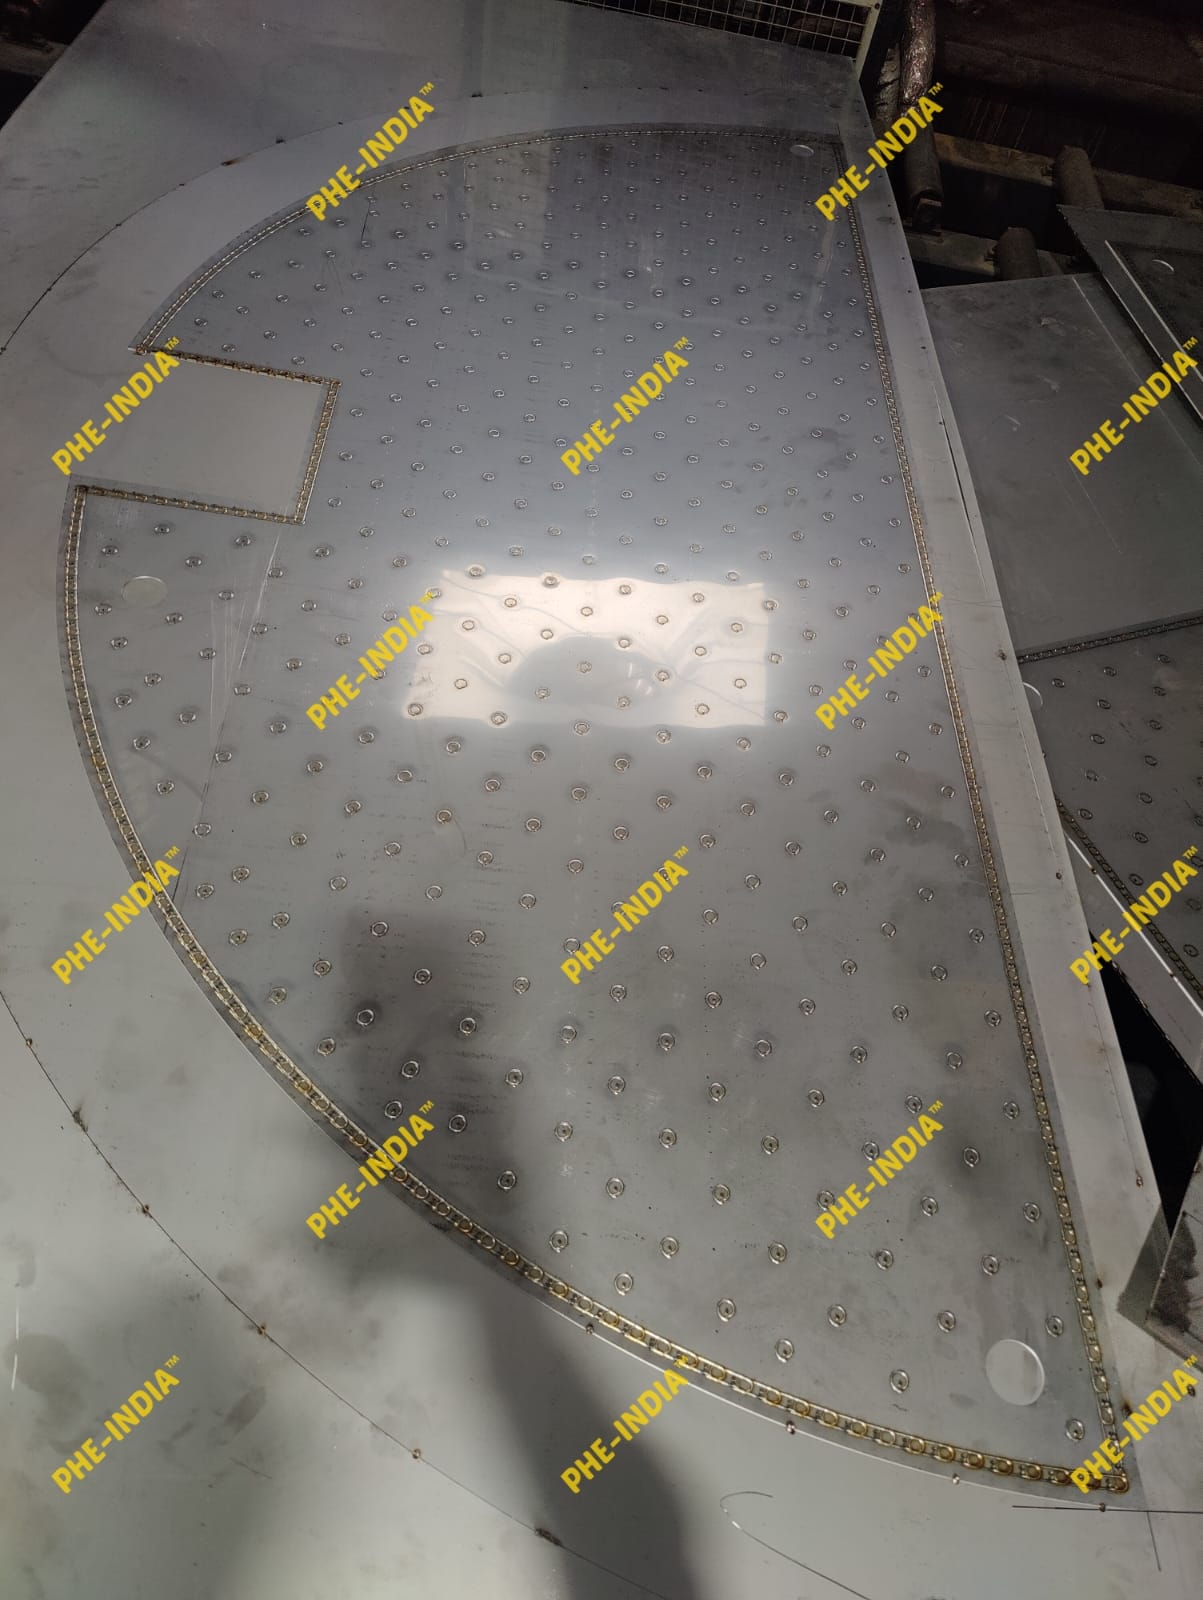 Pillow Plate For Evaporator Plates